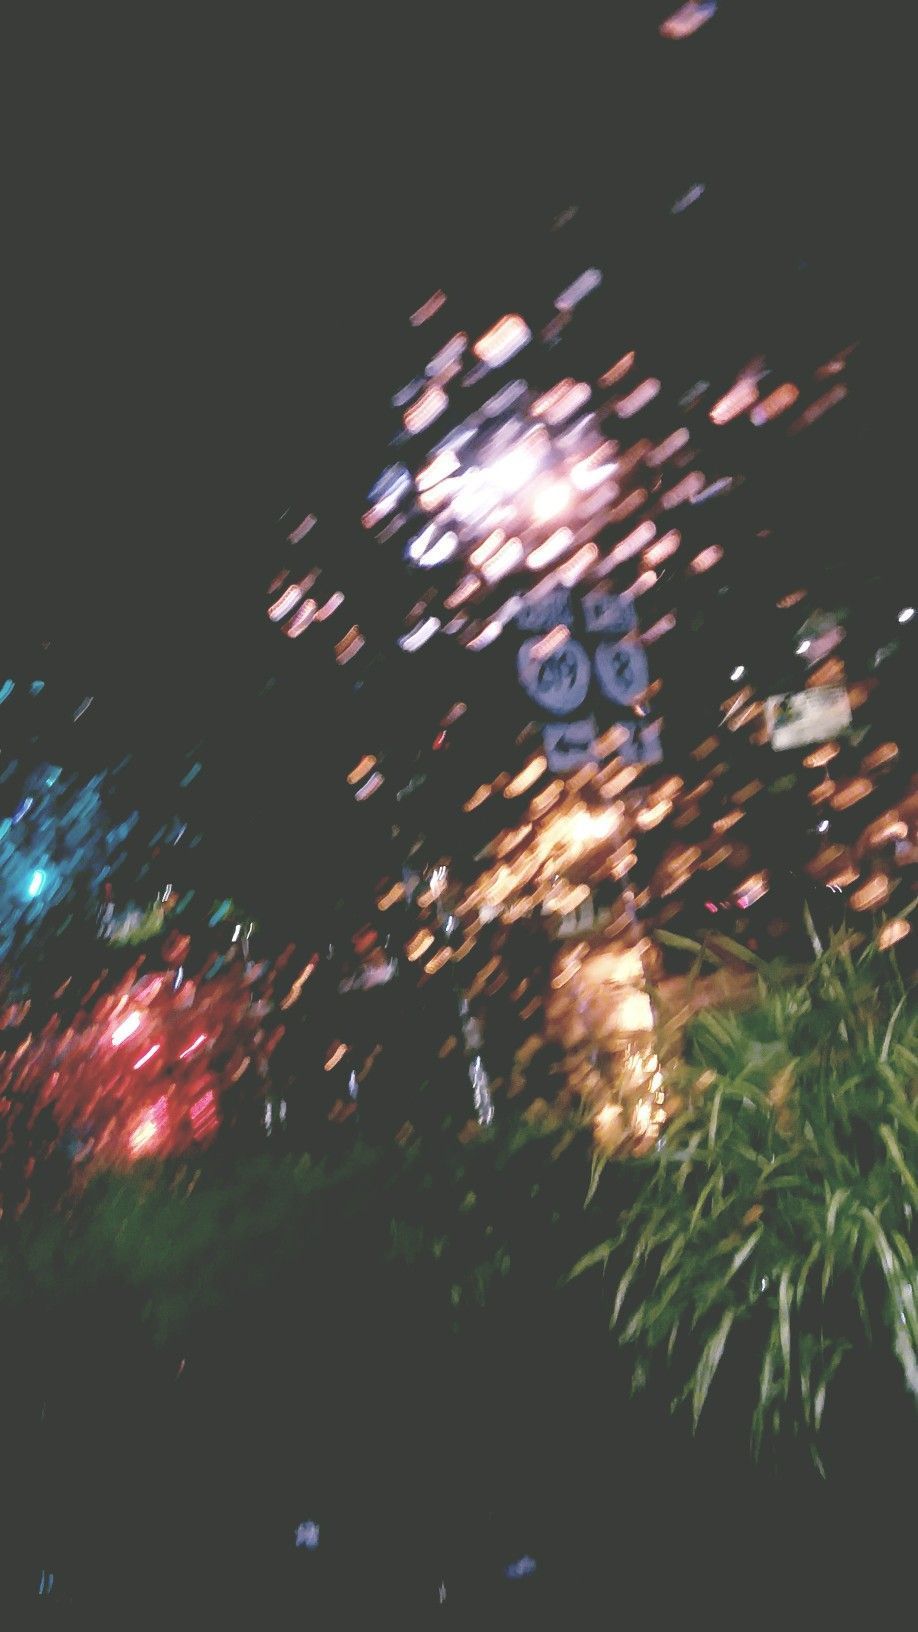 Blurry Aesthetic Wallpaper Free Blurry Aesthetic Background